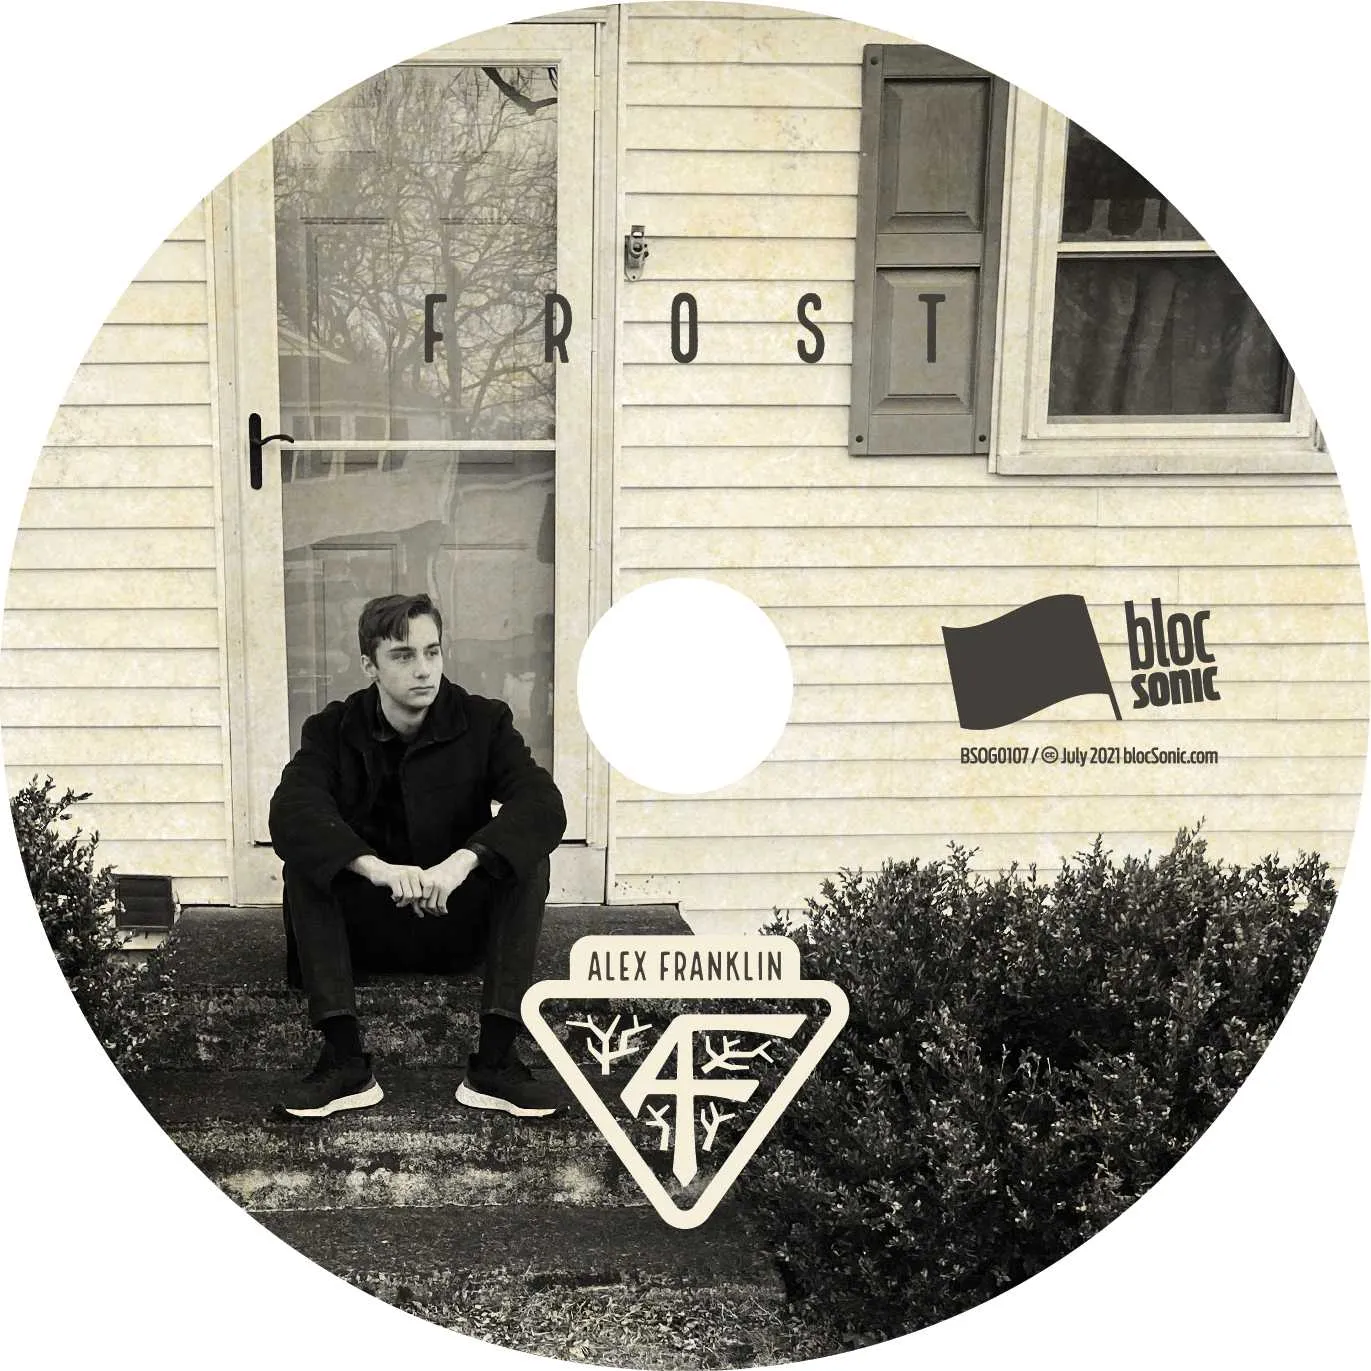 Album disc for “FROST” by Alex Franklin